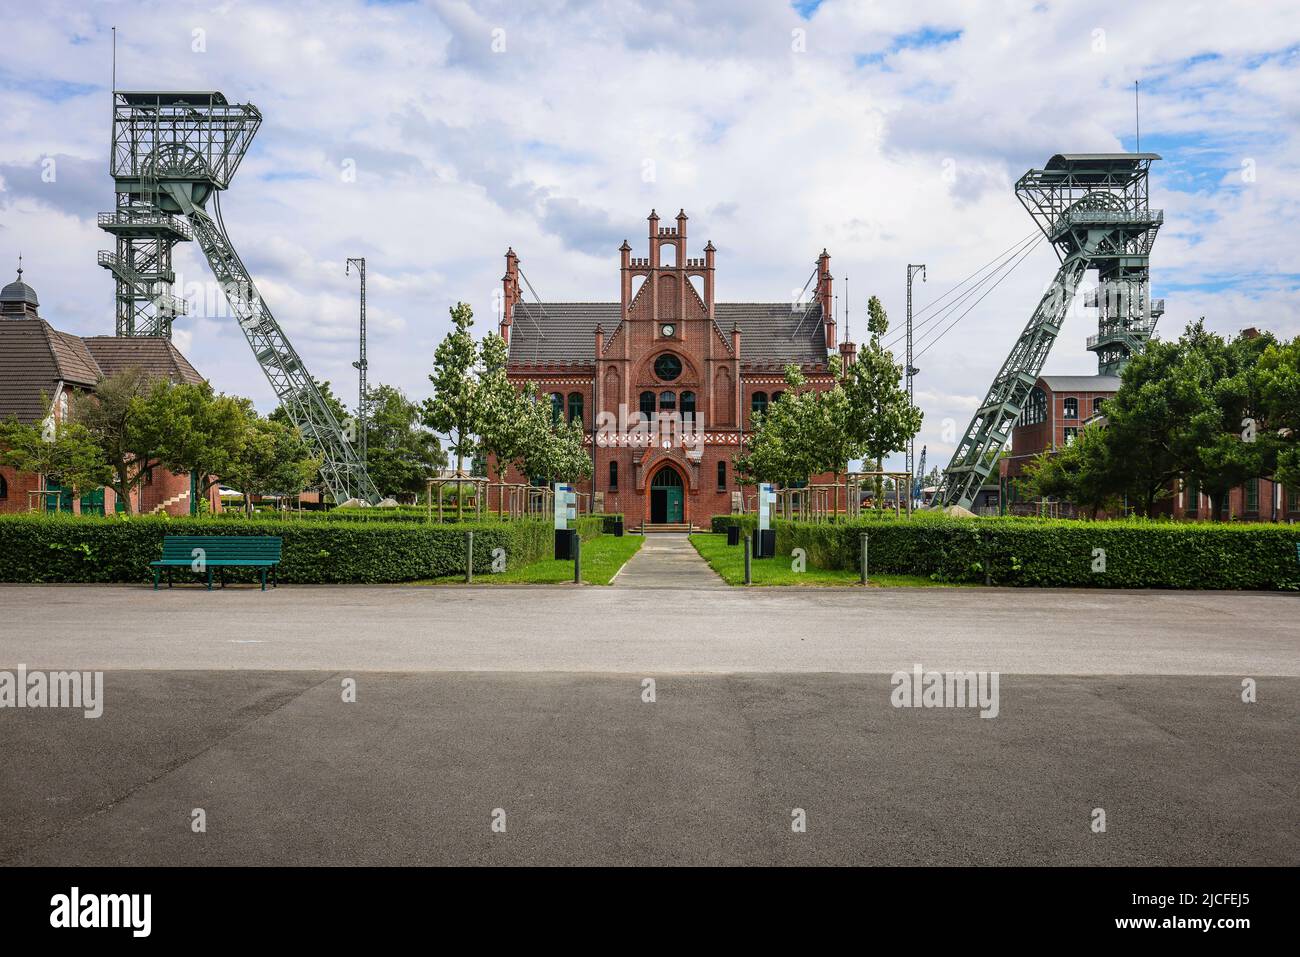 Dortmund, North Rhine-Westphalia, Germany - LWL Industrial Museum Zollern Colliery. Zollern Colliery is a disused coal mine in the northwest of the city of Dortmund, in the district of Boevinghausen. Stock Photo